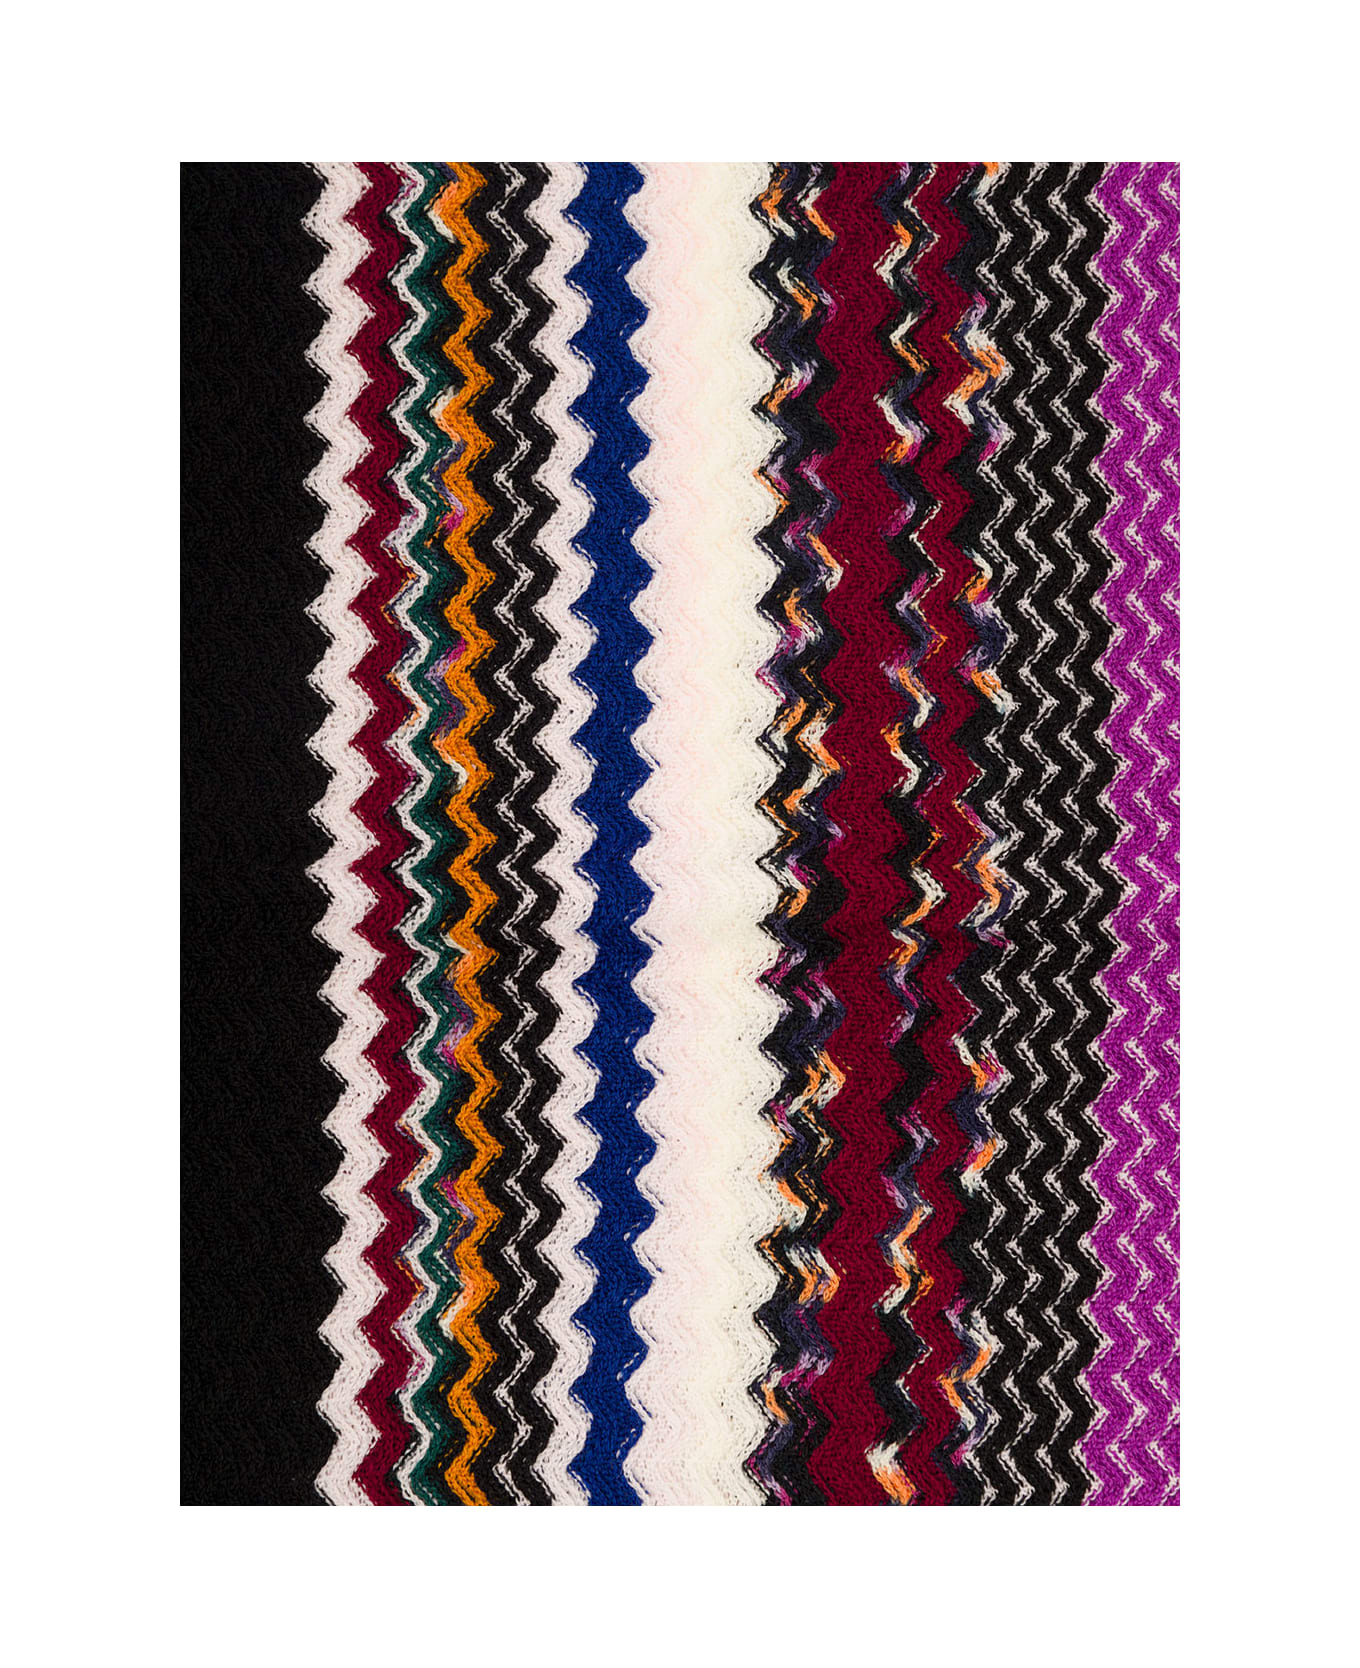 Missoni Multicolor Scarf With Zigzag Motif And Fringed Hem In Wool Blend Woman - Multicolor